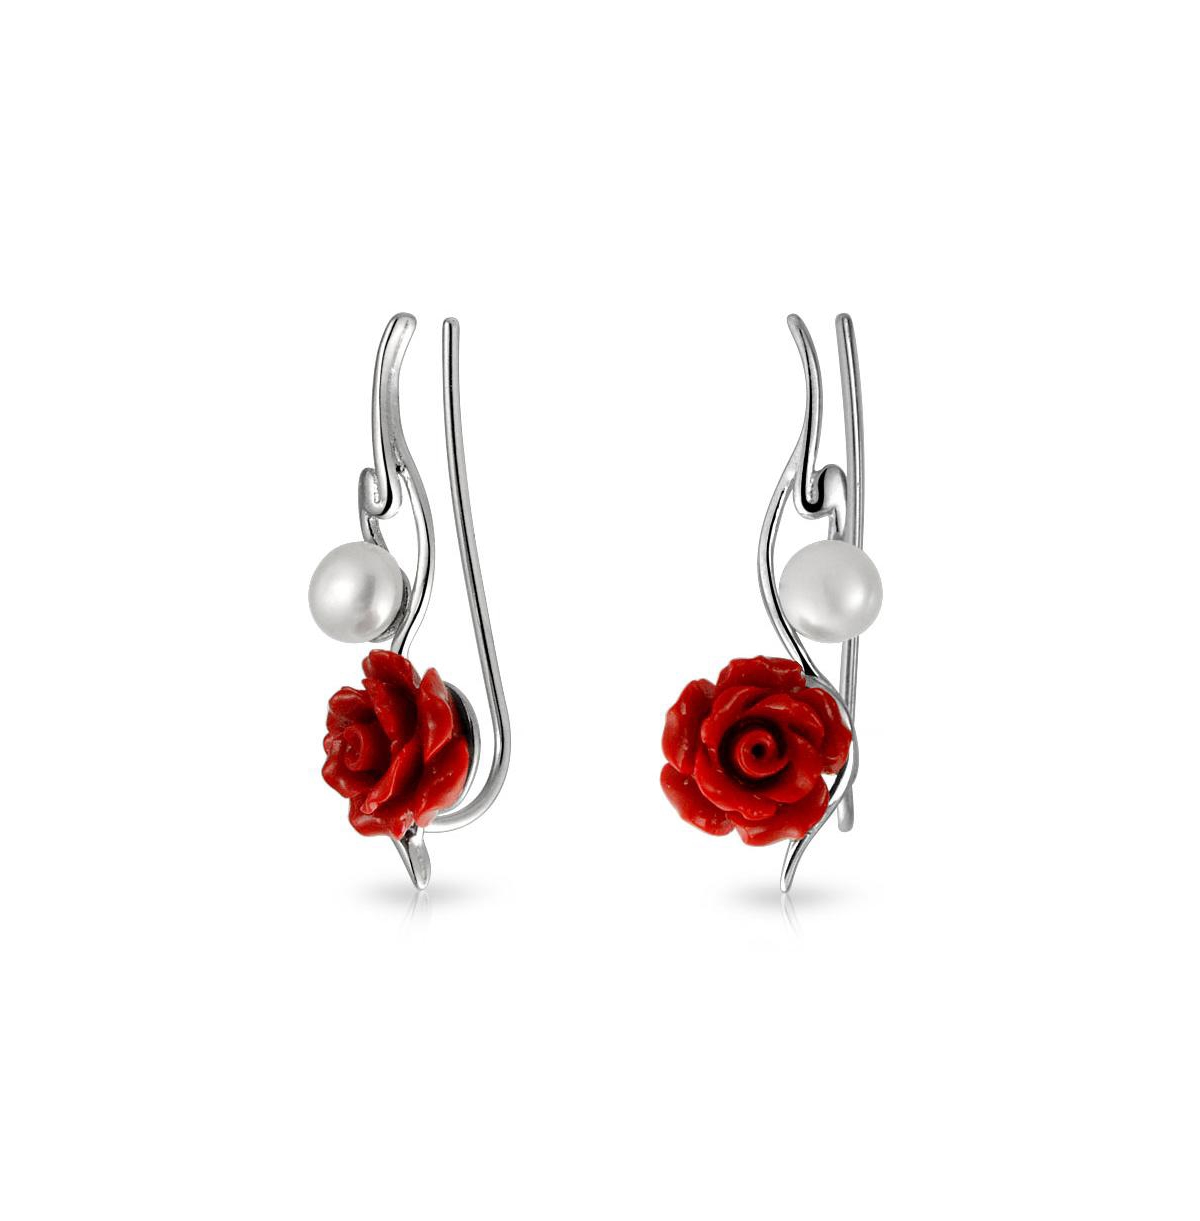 Trendy 3D Red Rose Flower White Freshwater Cultured Pearl Wire Ear Pin Climbers Crawlers Earrings For Women .925 Sterling Silver - Red